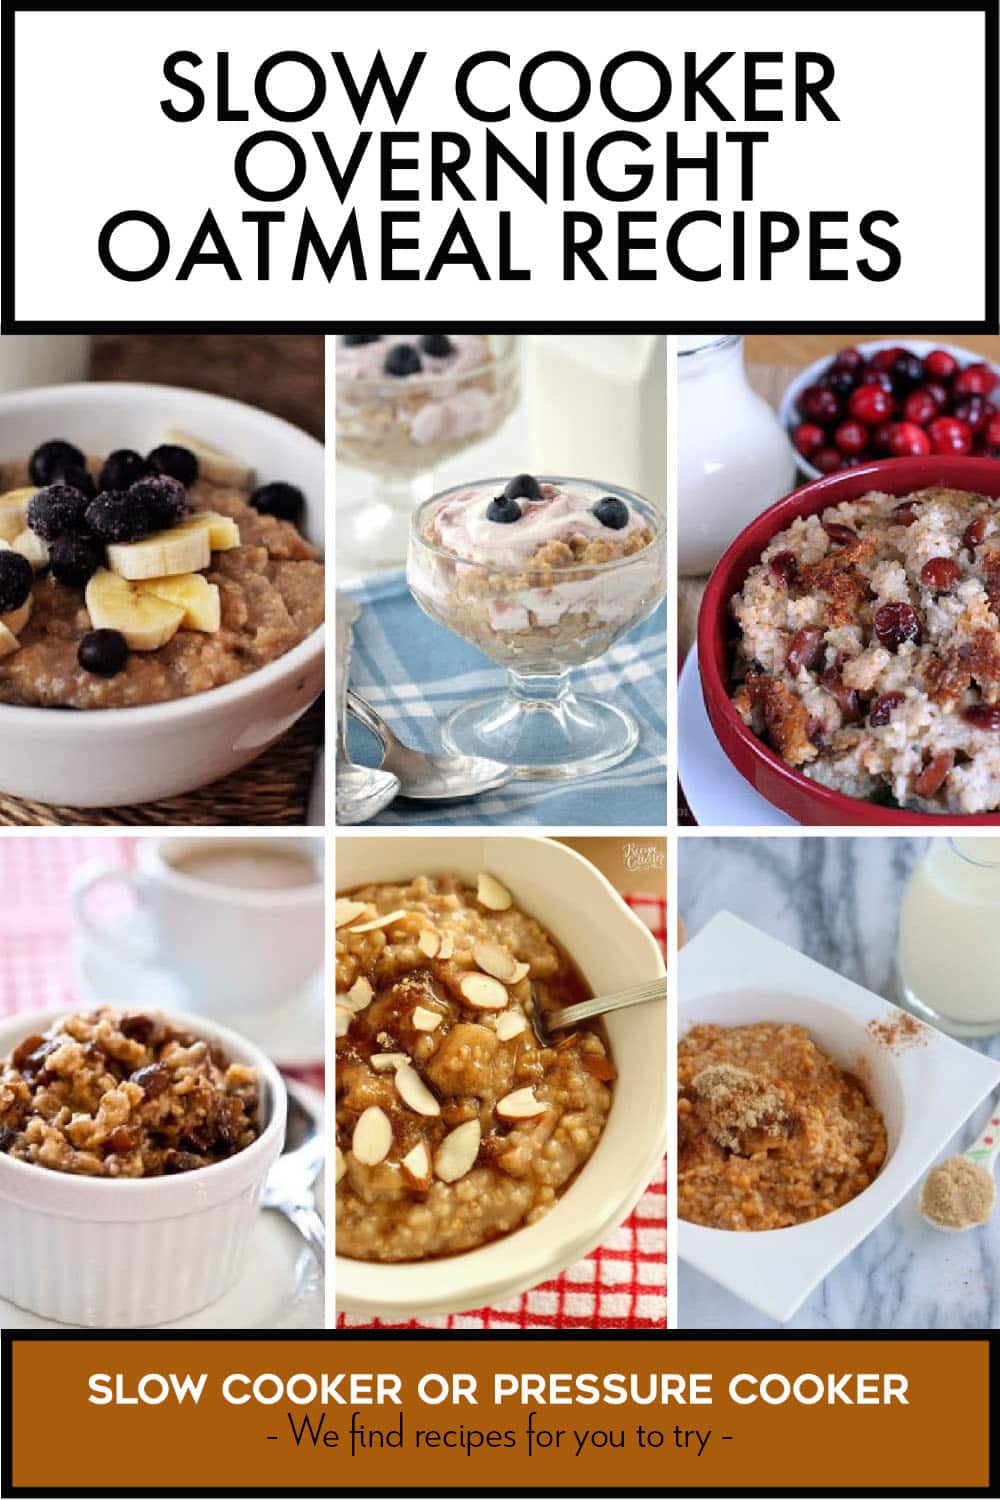 Pinterest image of Slow Cooker Overnight Oatmeal Recipes